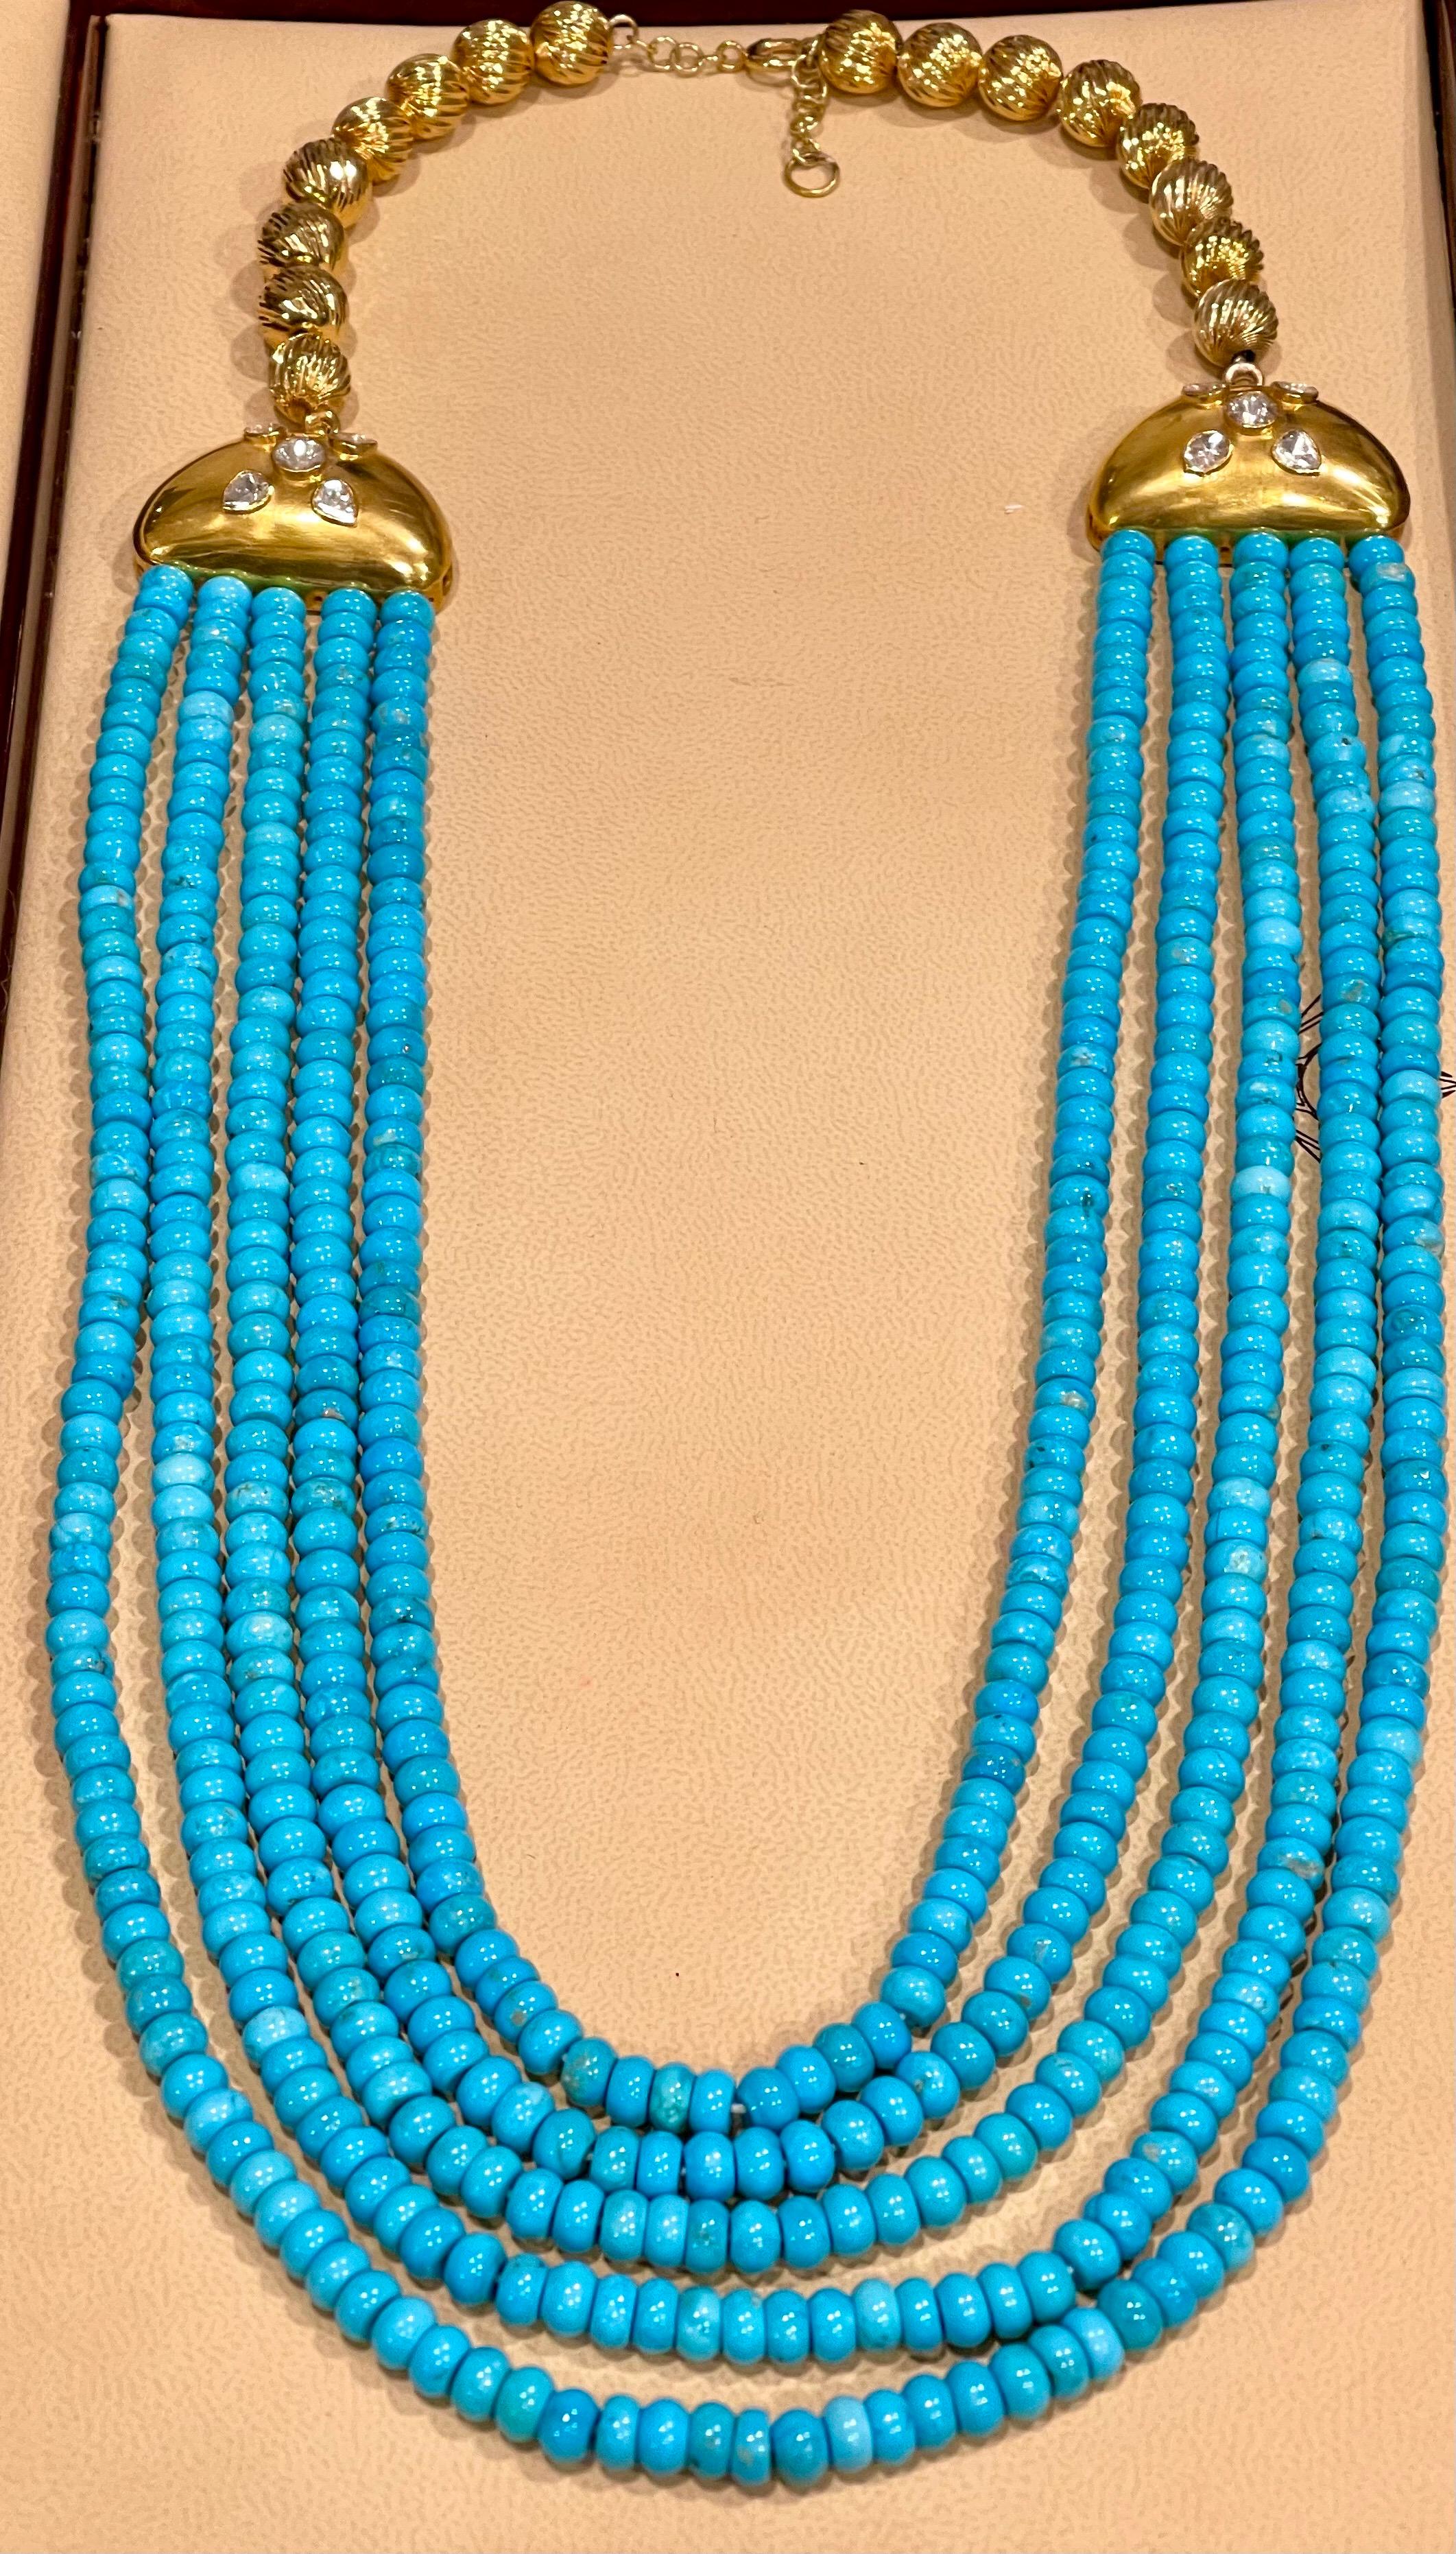 700 Ct Natural Sleeping Beauty Turquoise Necklace + Diamond 5 Strand 14 Kt Gold For Sale 7